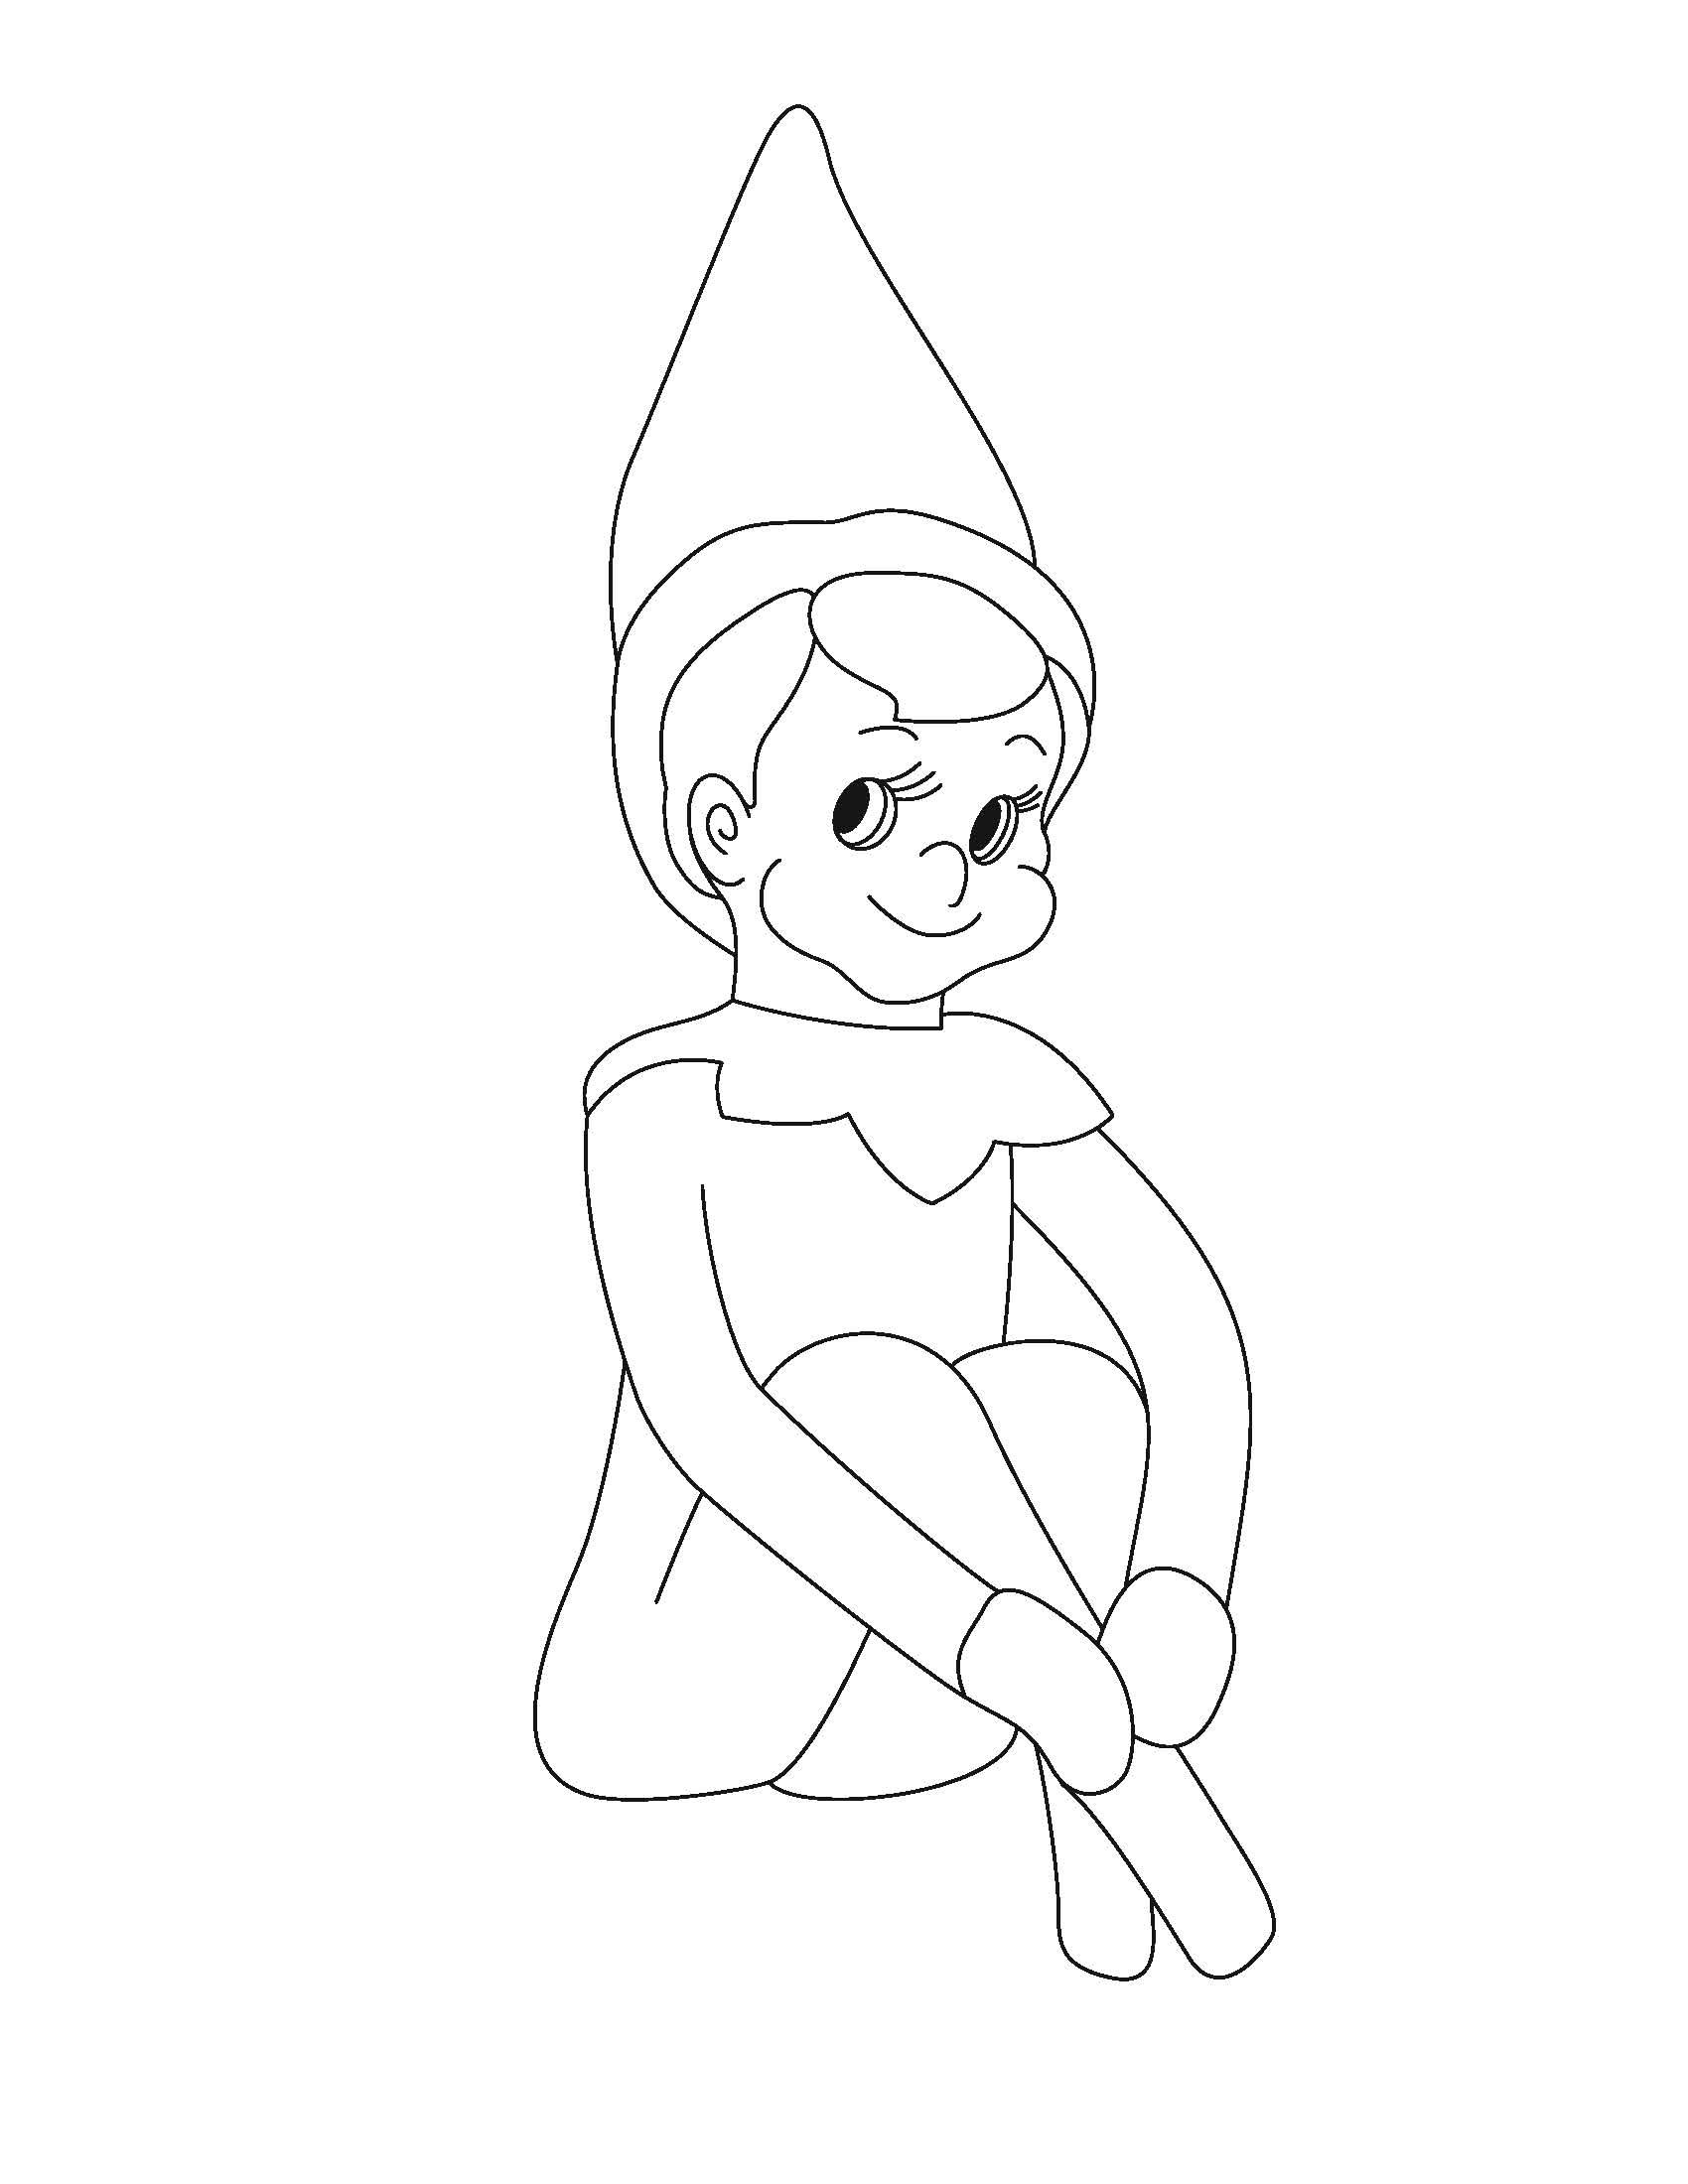 Free Printable Girl Elf On The Shelf Coloring Pages, Download Free Clip